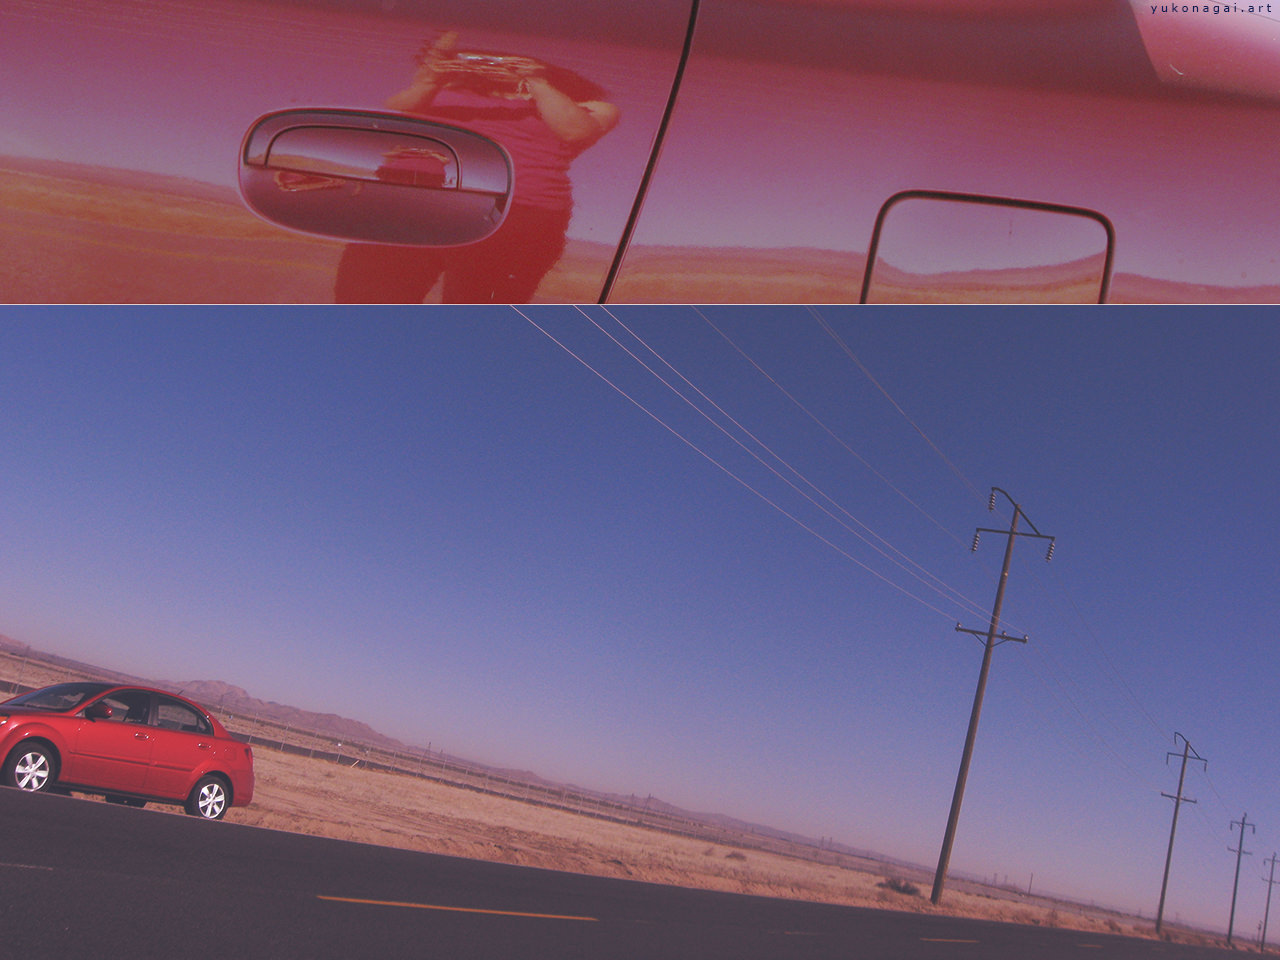 A red car parked by a desert road, and the photographer's reflection on car window.